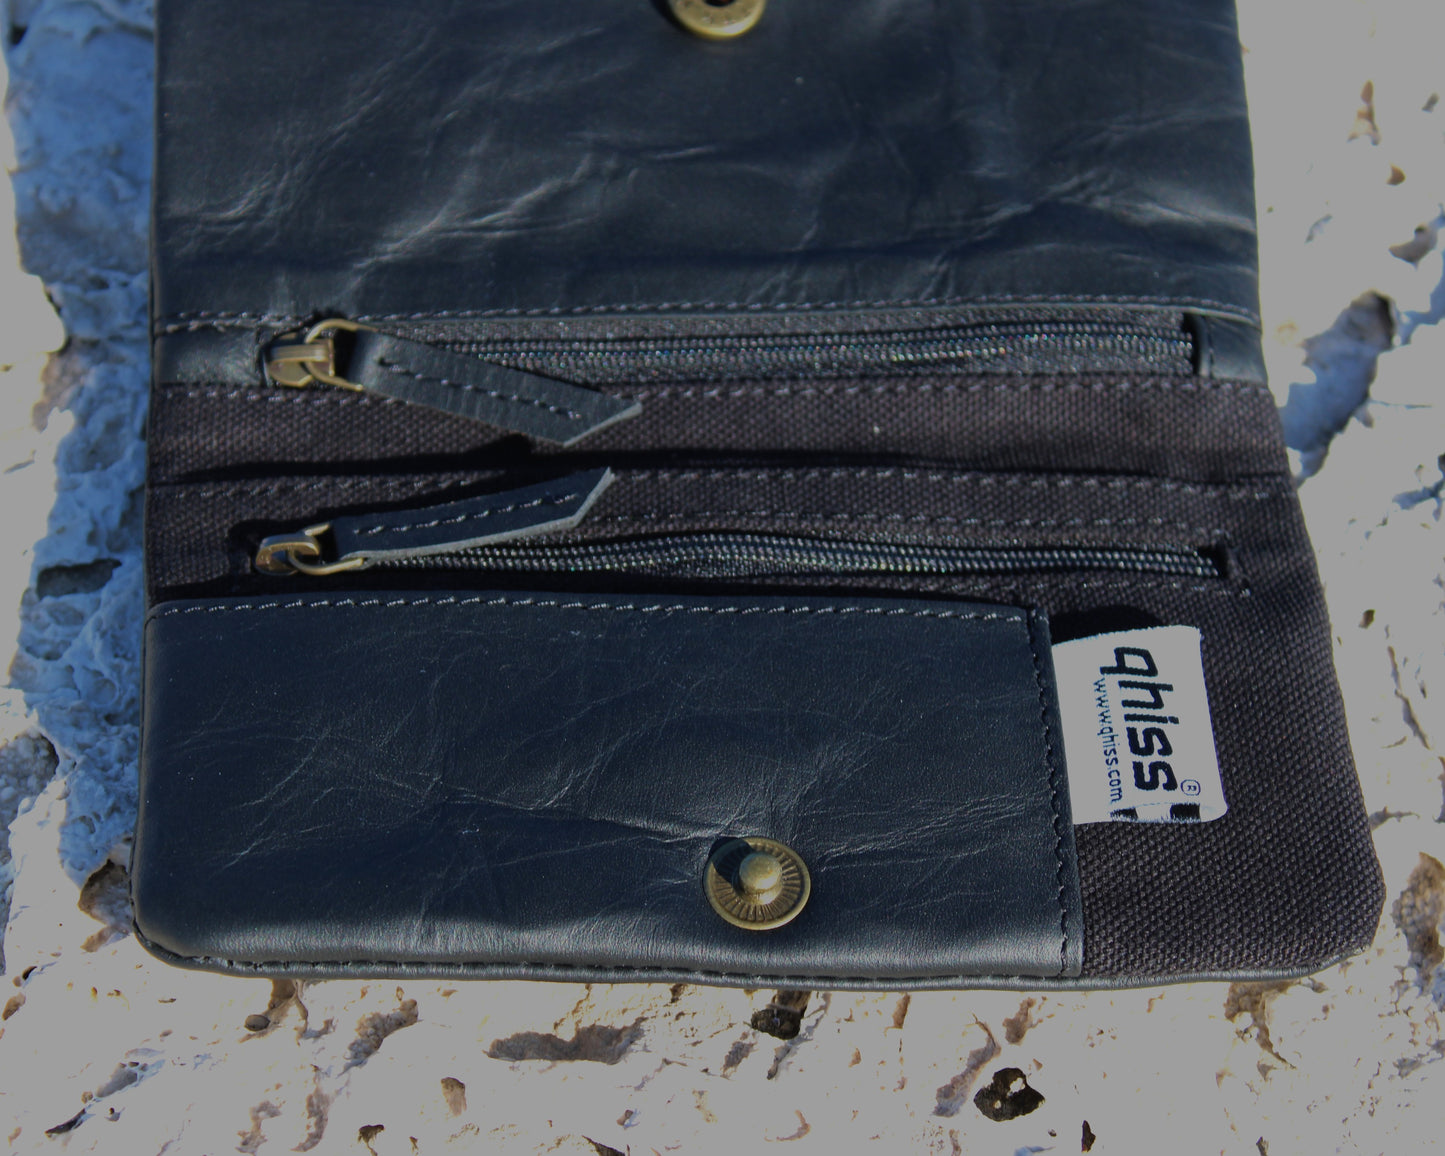 Tobacco Pouch in Leather mod. Berlin Black